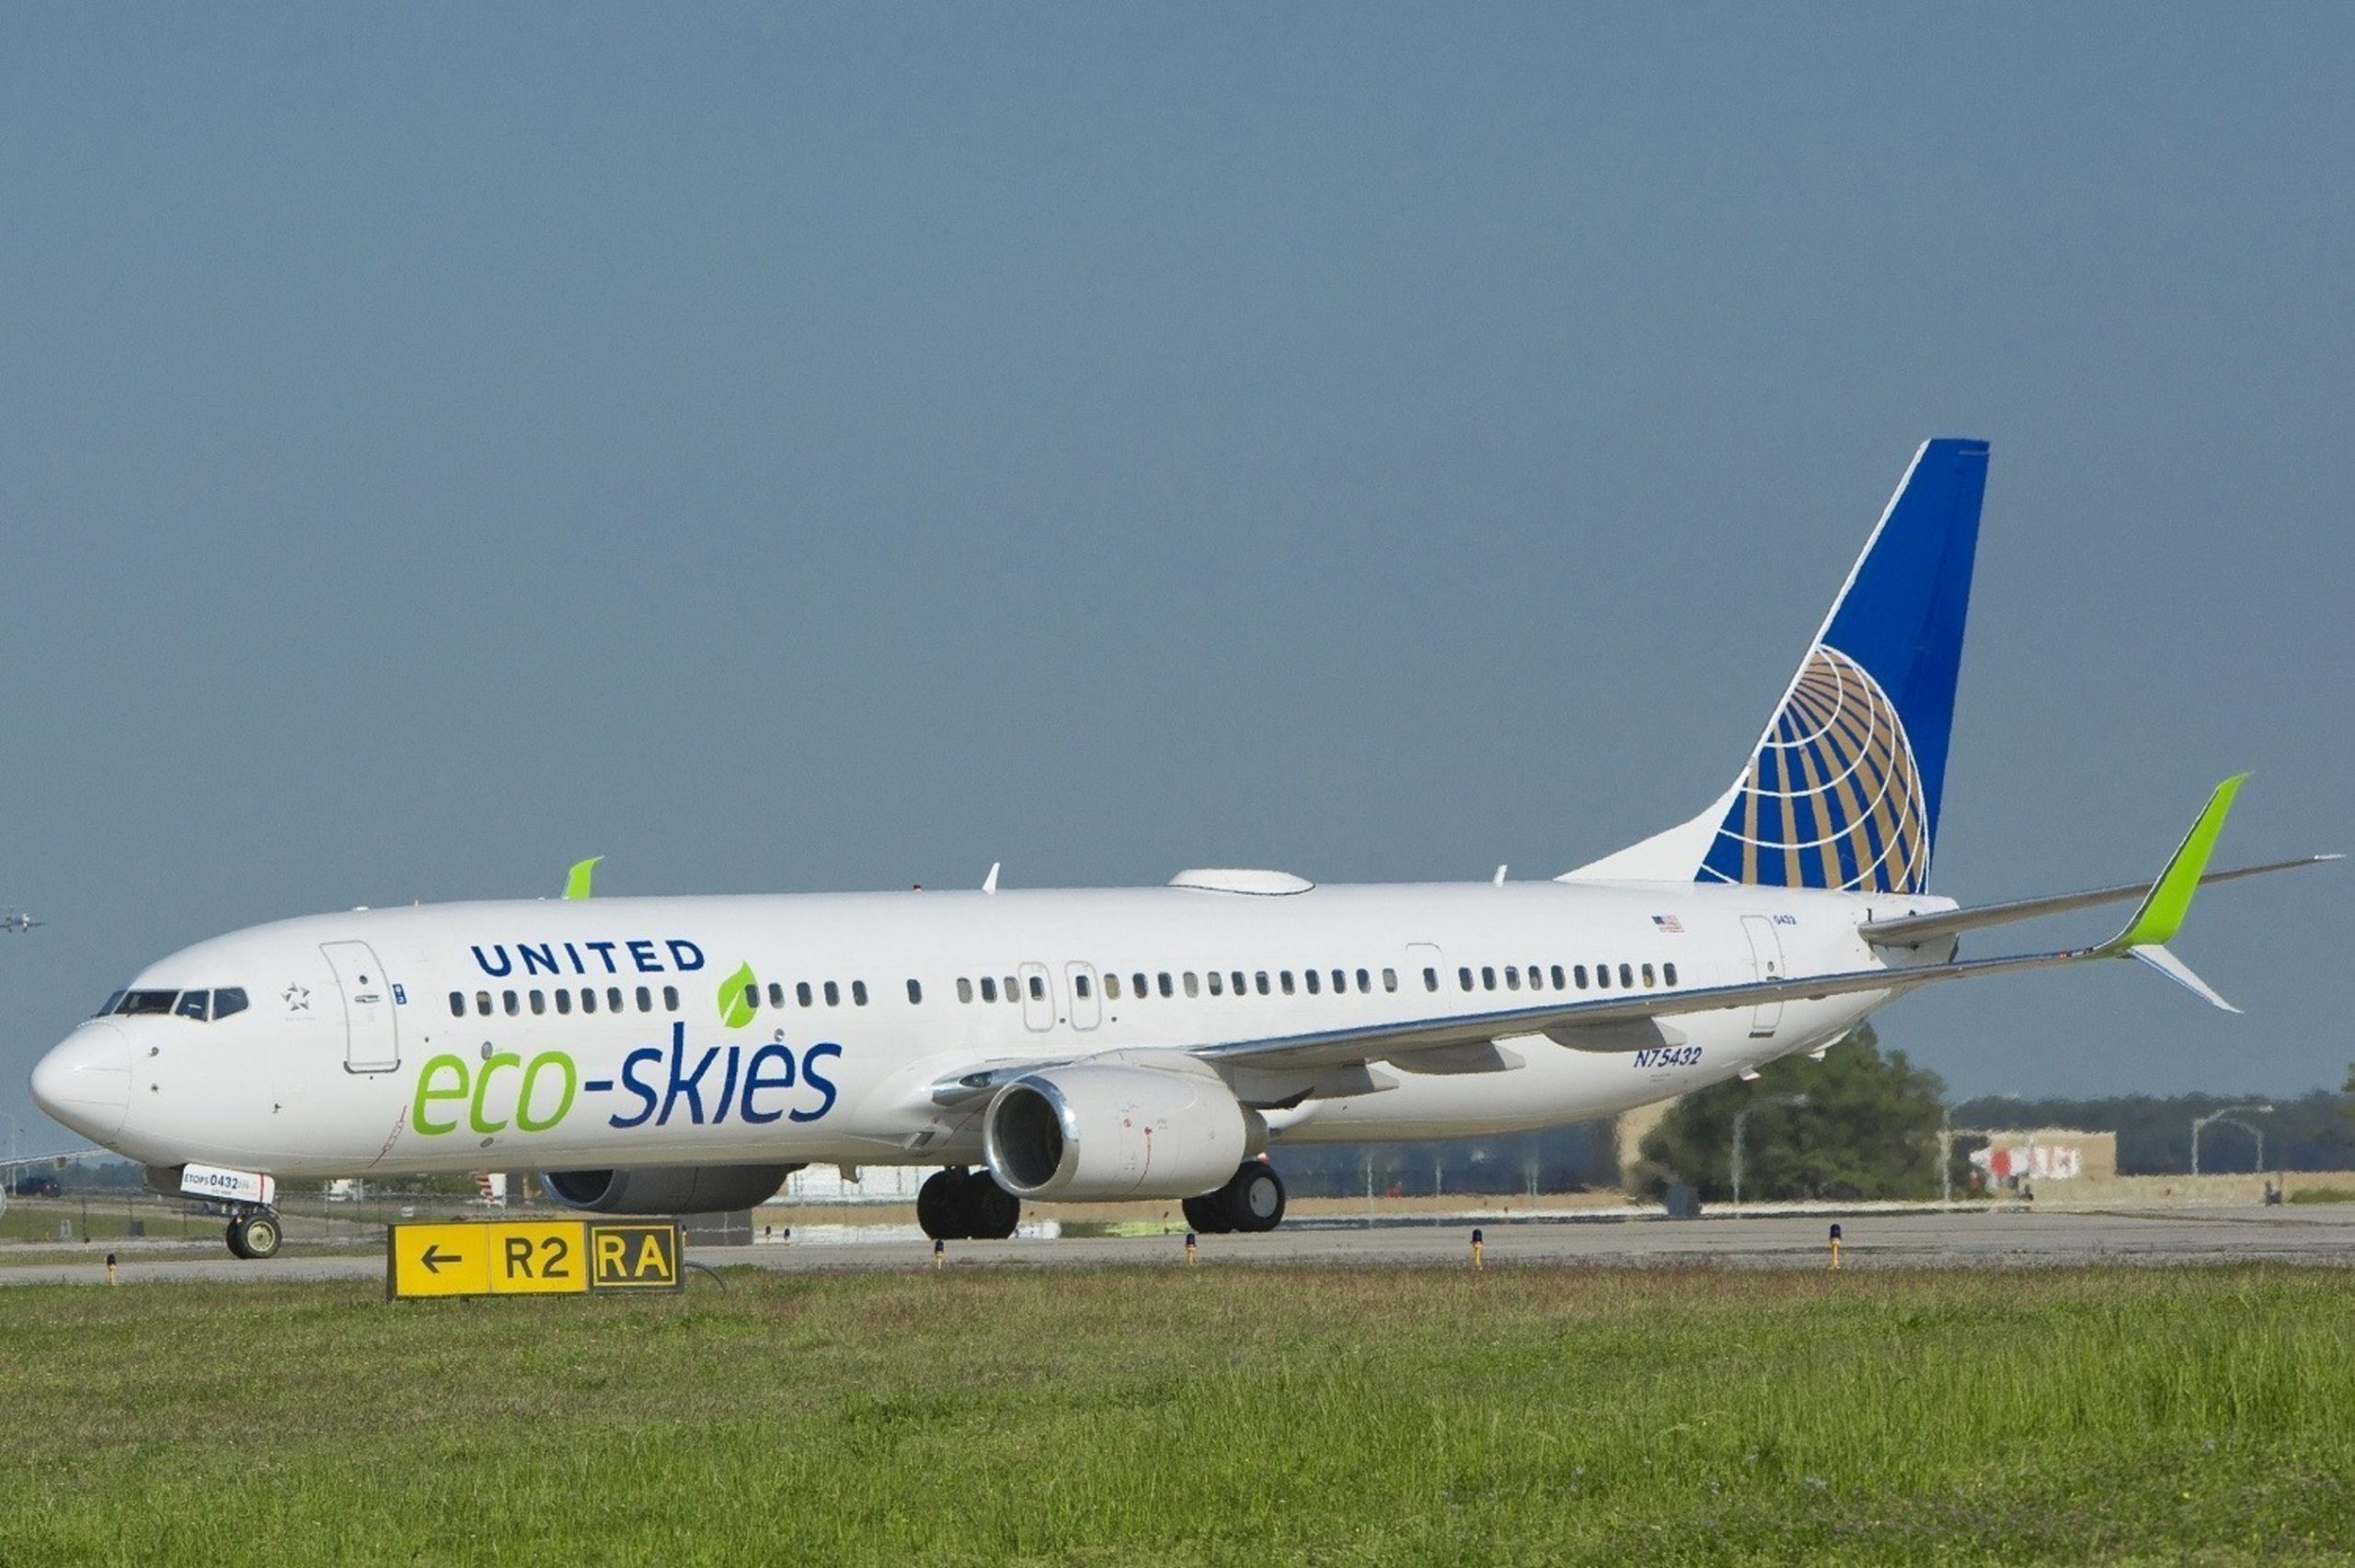 All United Airlines flights from LA are powered by biofuel